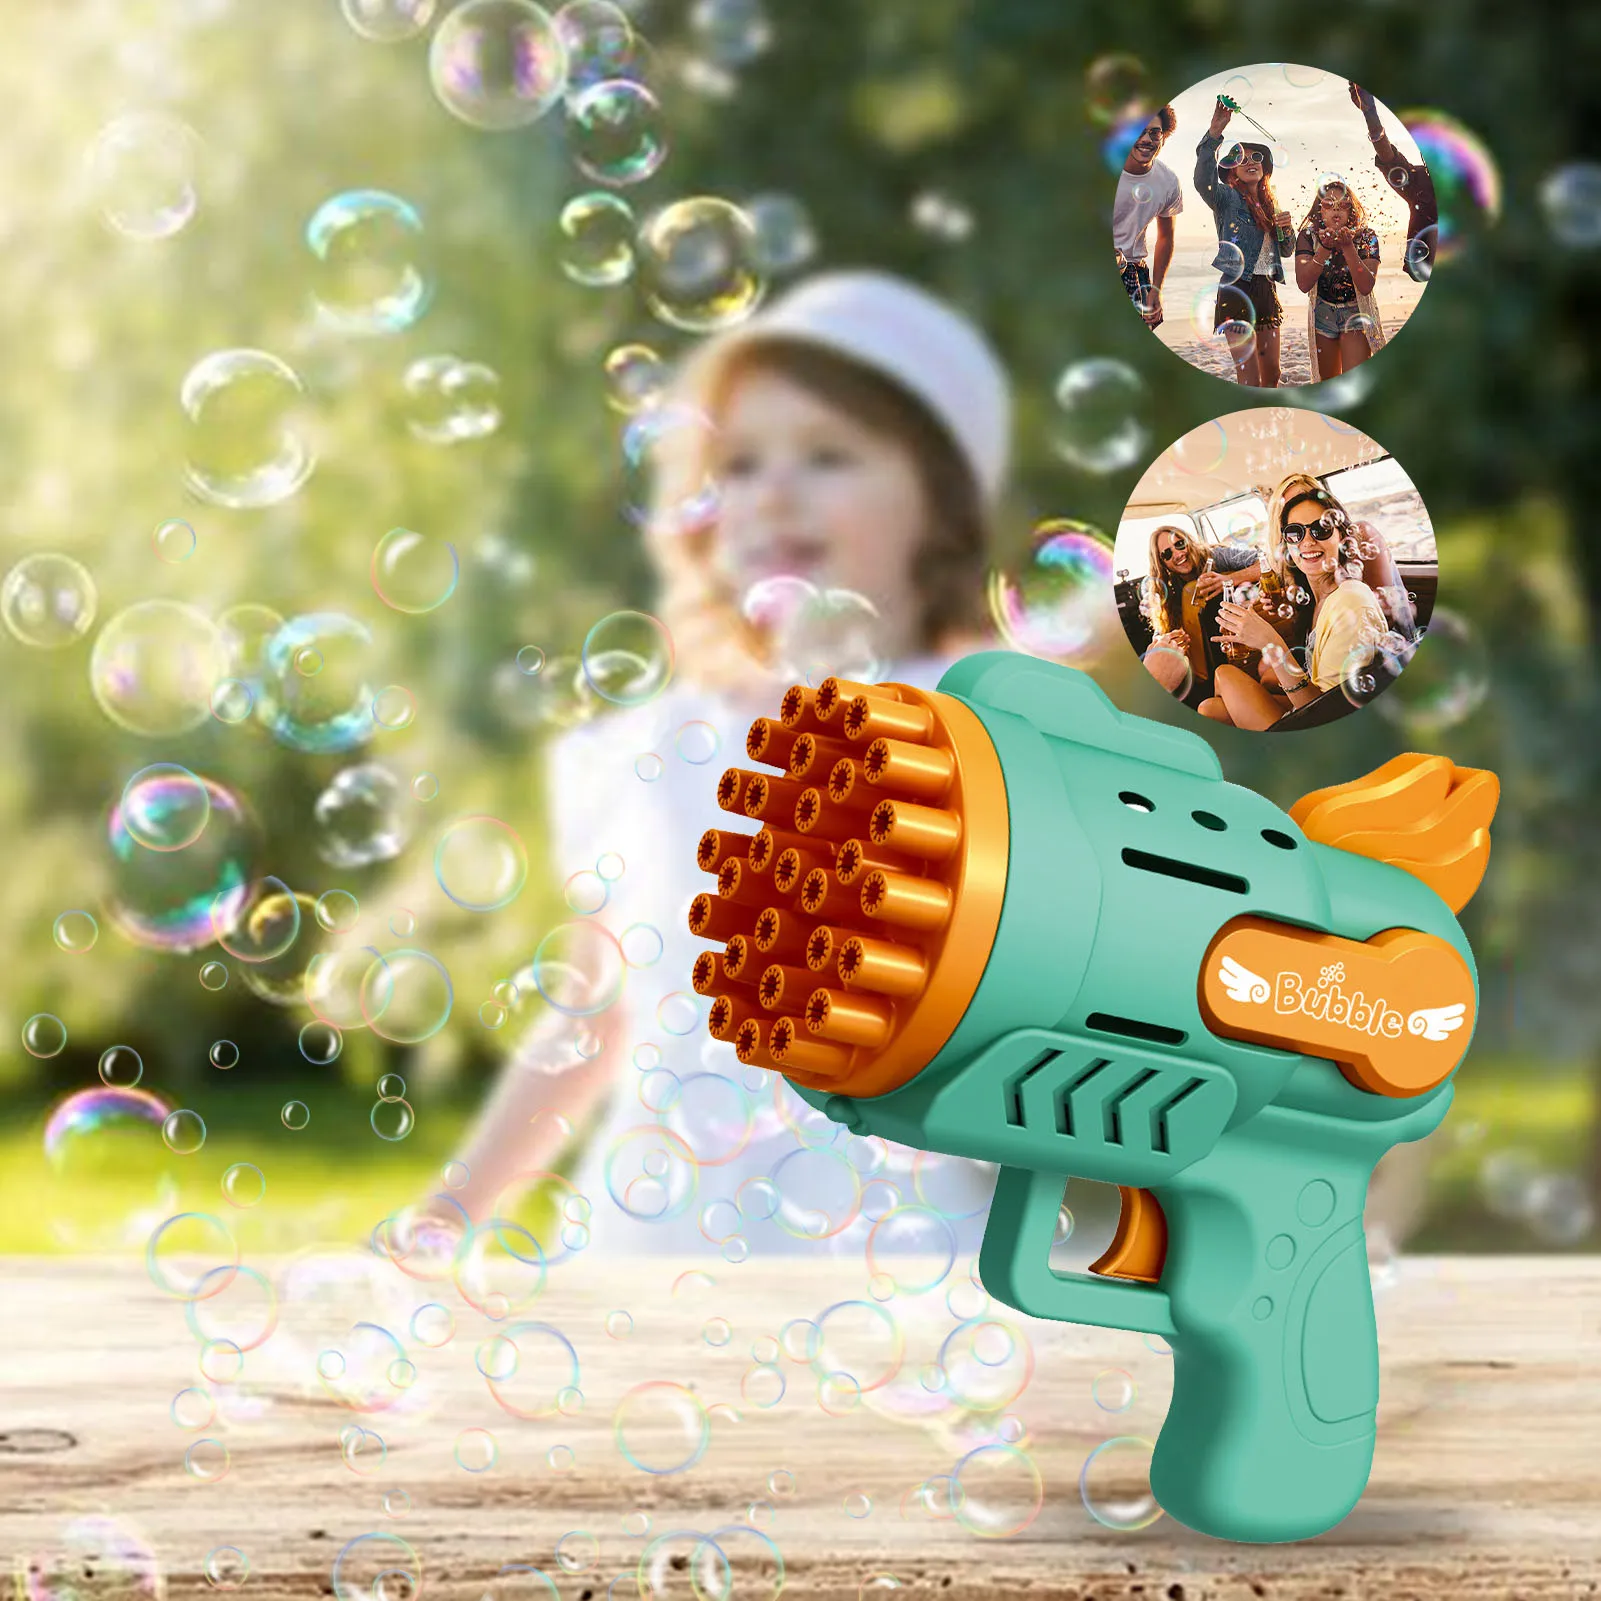 Bubble Gun Rocket 29 Hole Automatic Soap Bubbles Machine Outdoor Toy for Boys Birthday Gifts Wedding Party Children Summer Gift automatic fireworks bubble machine with flash lights sounds for kids outdoor toys pro party festival celebrate bubble machines